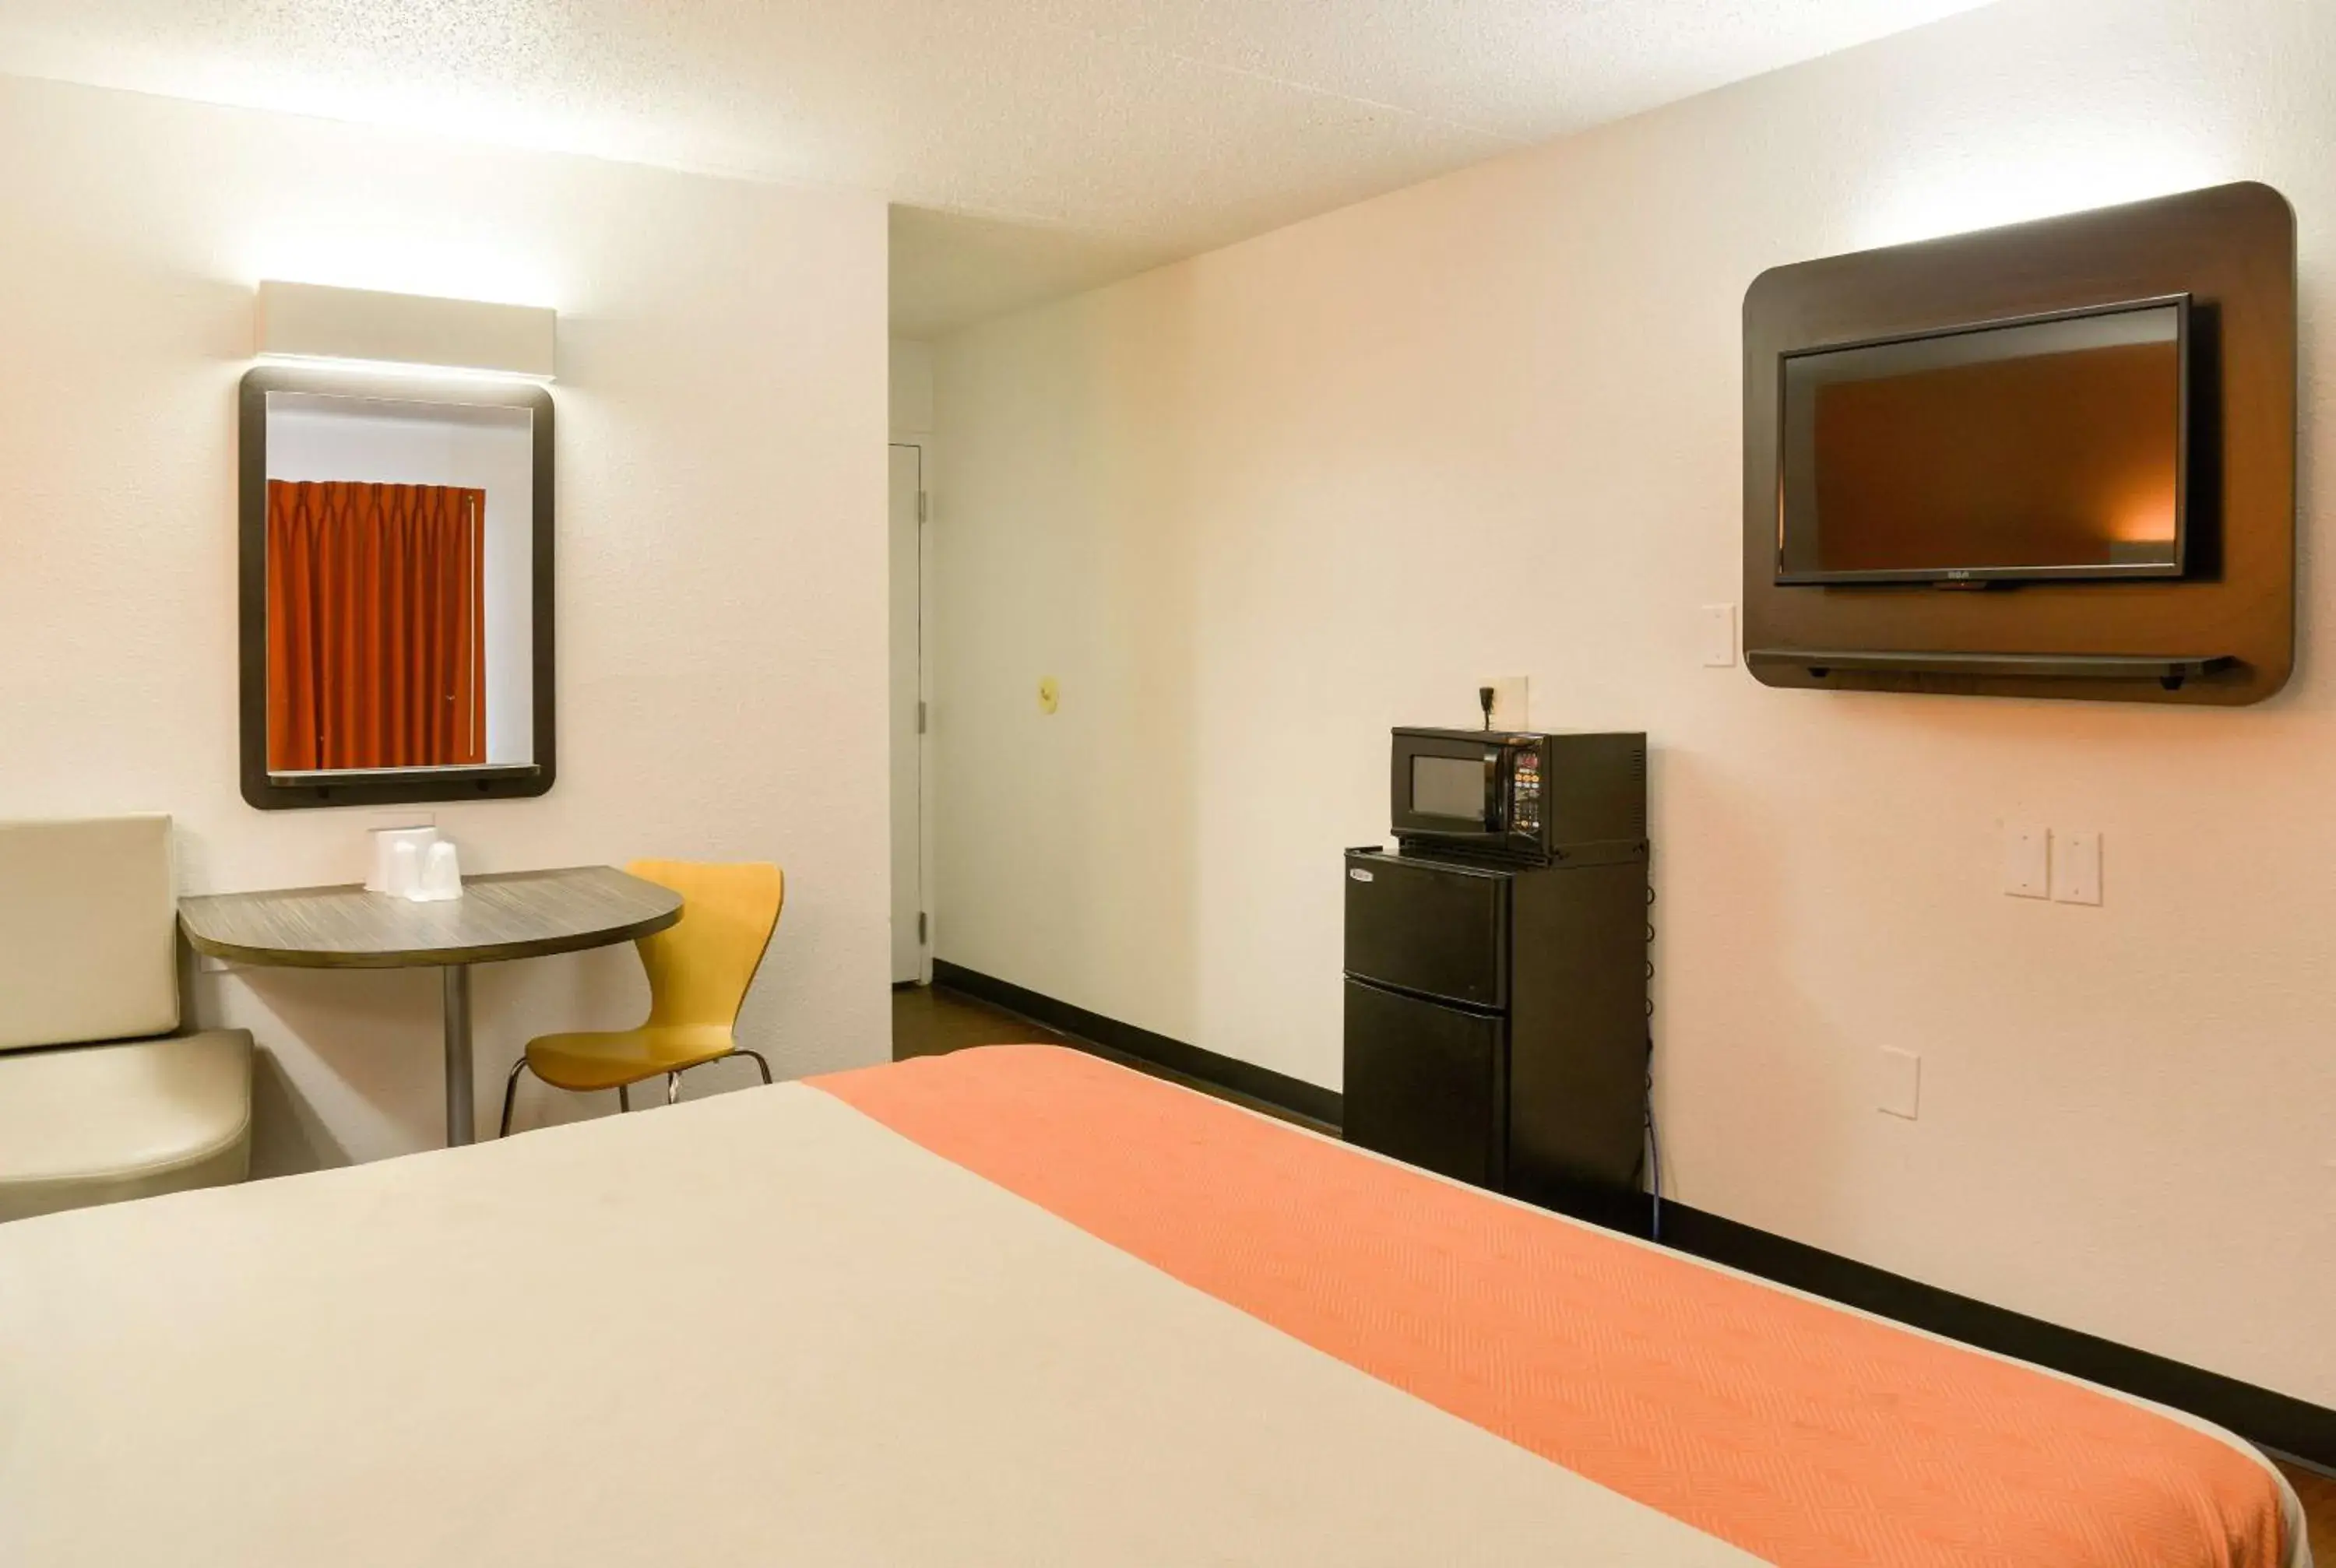 TV and multimedia, Room Photo in Motel 6-Toledo, OH